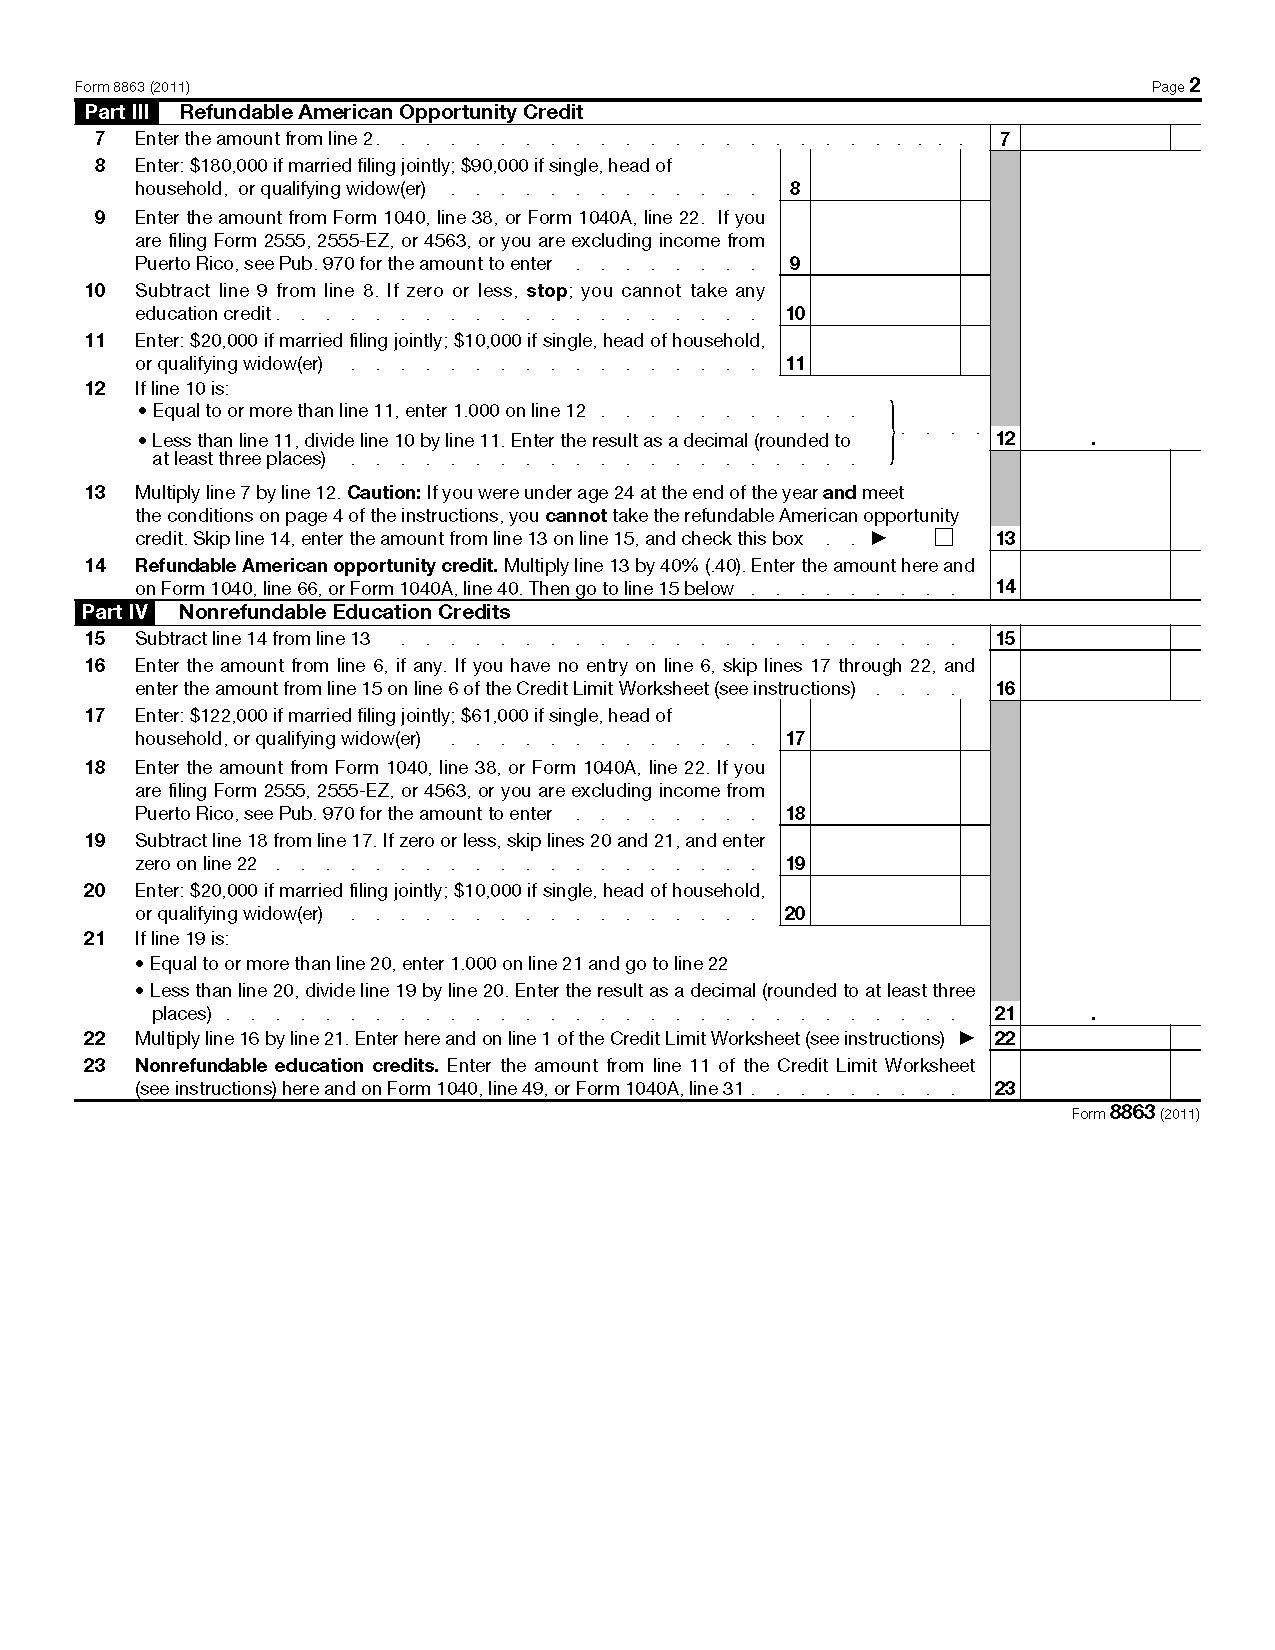 2017 Child Tax Credit Worksheet  Briefencounters As Well As Credit Limit Worksheet 8880